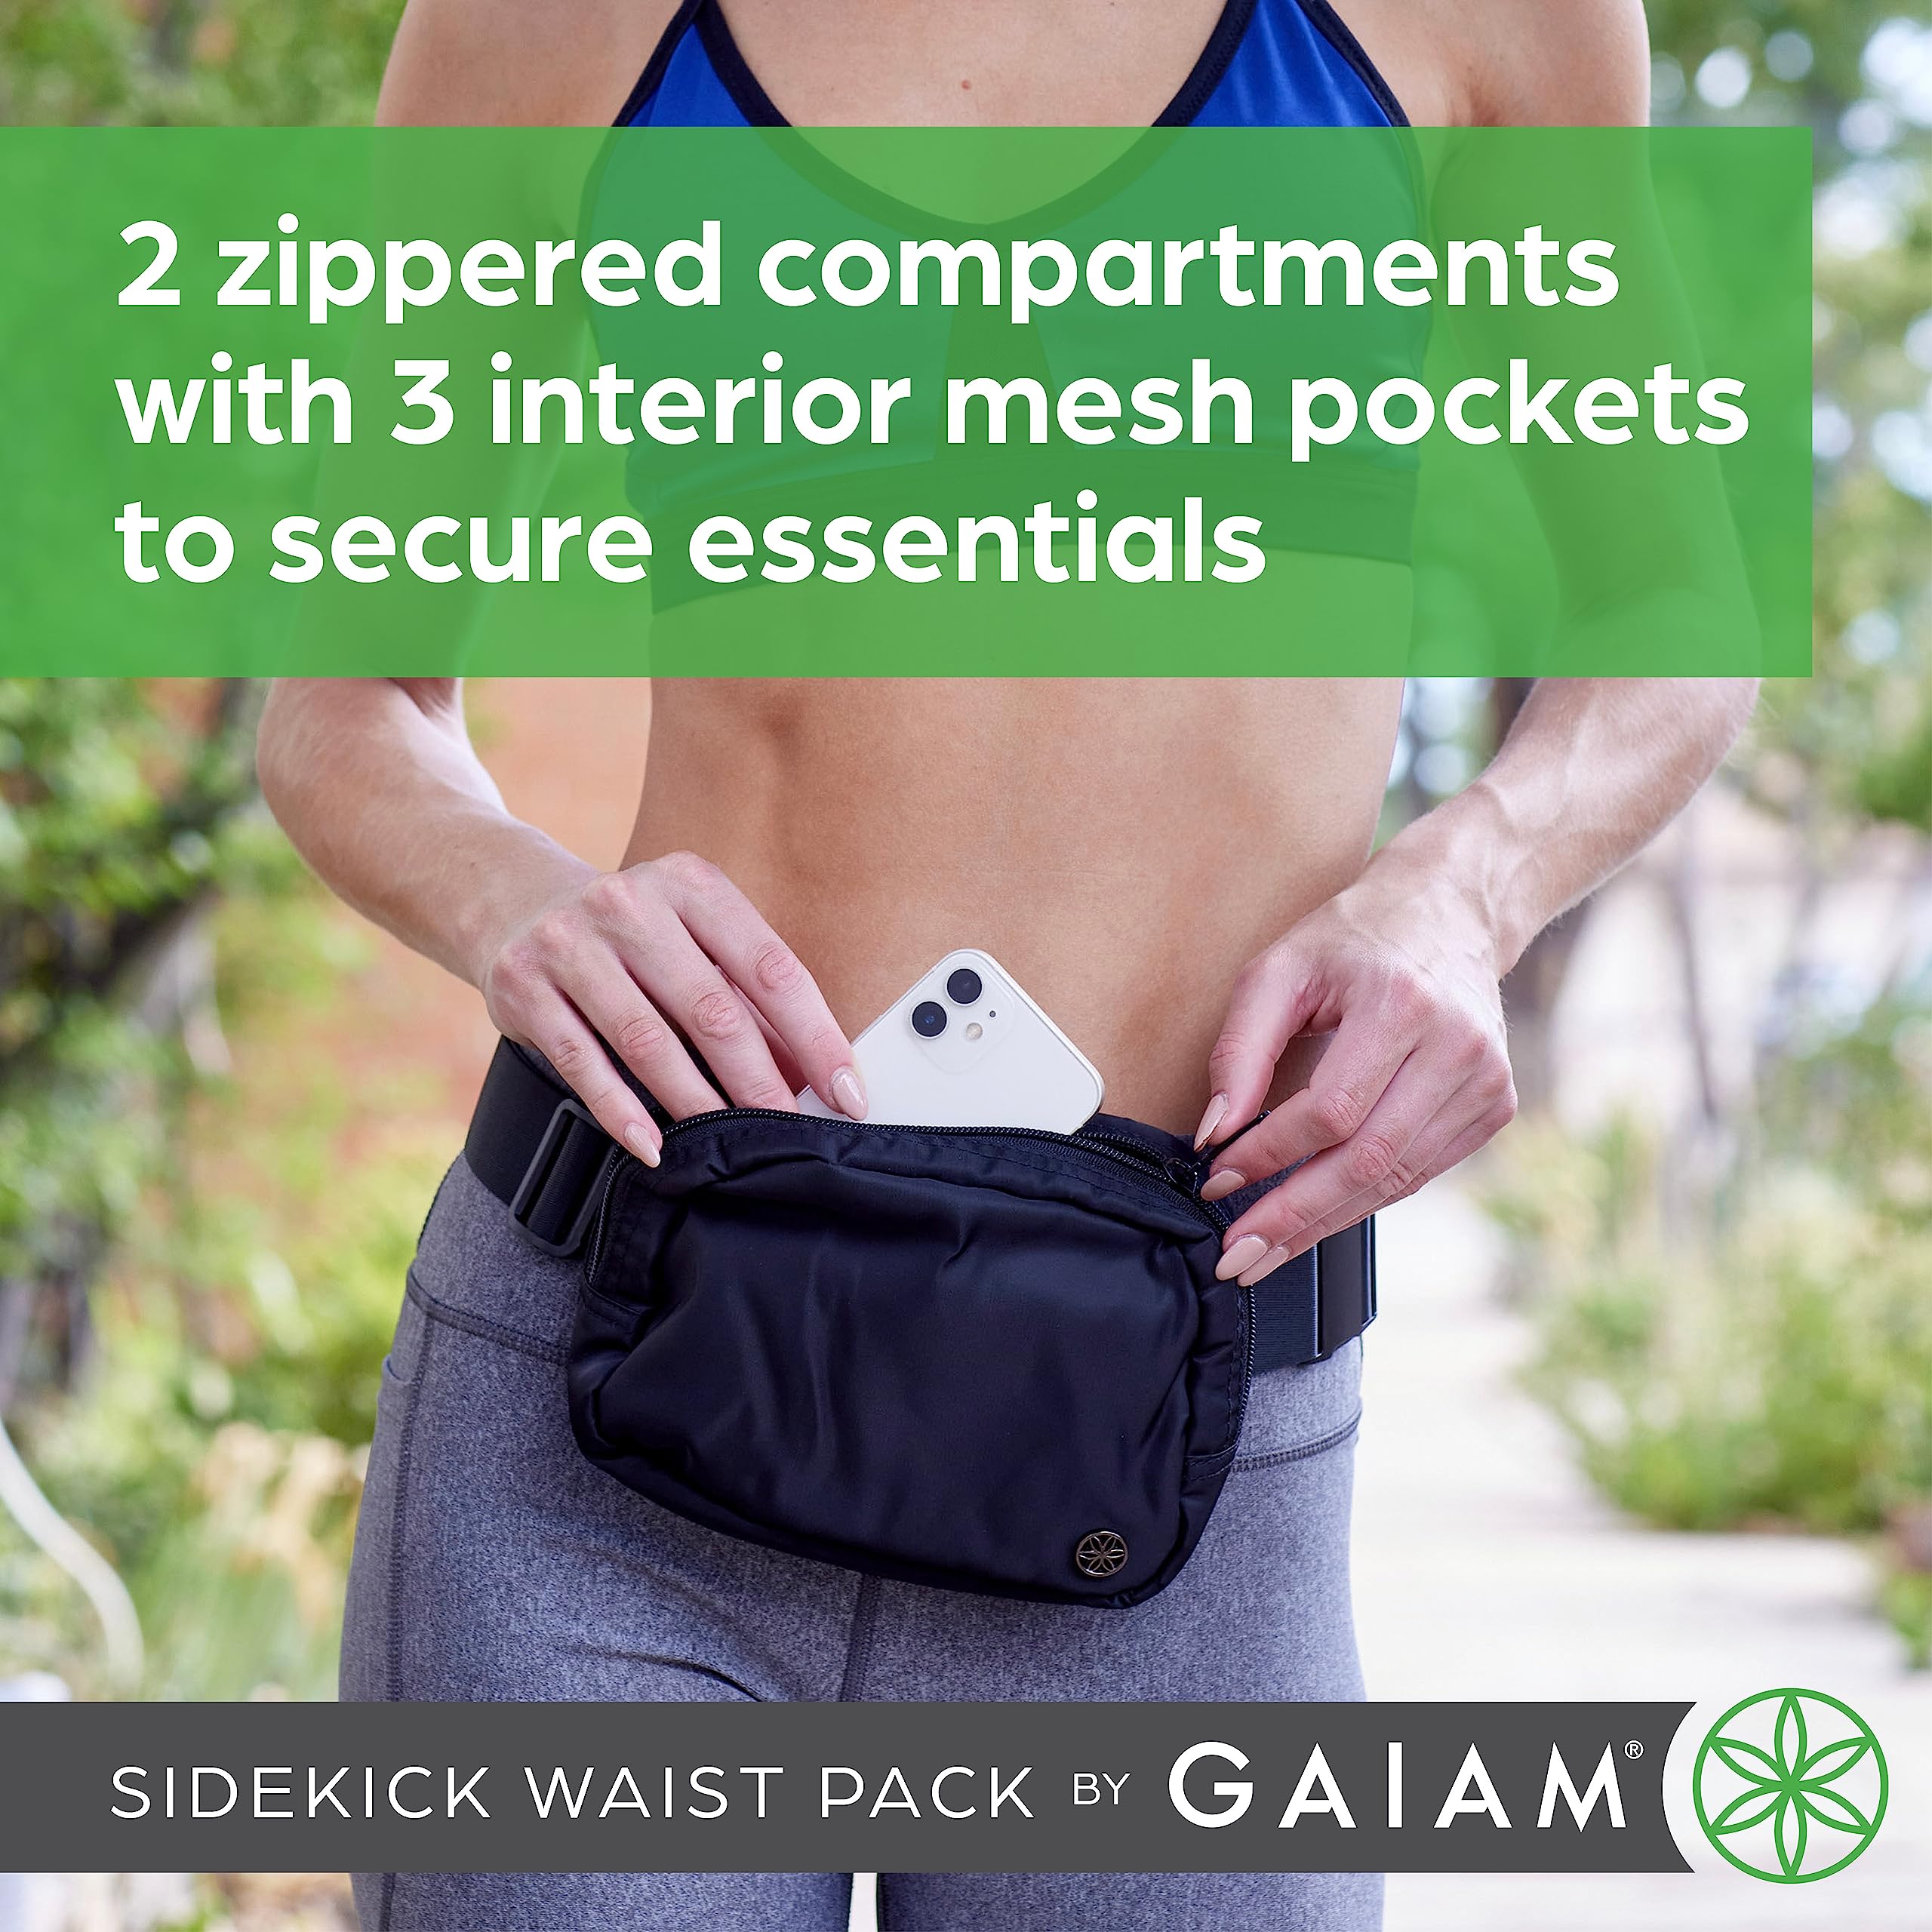 Gaiam Sidekick Waist Pack - Storage Belt Bag for Women And Men - Adjustable Belt With Lightweight Pouch For The Gym & Studio